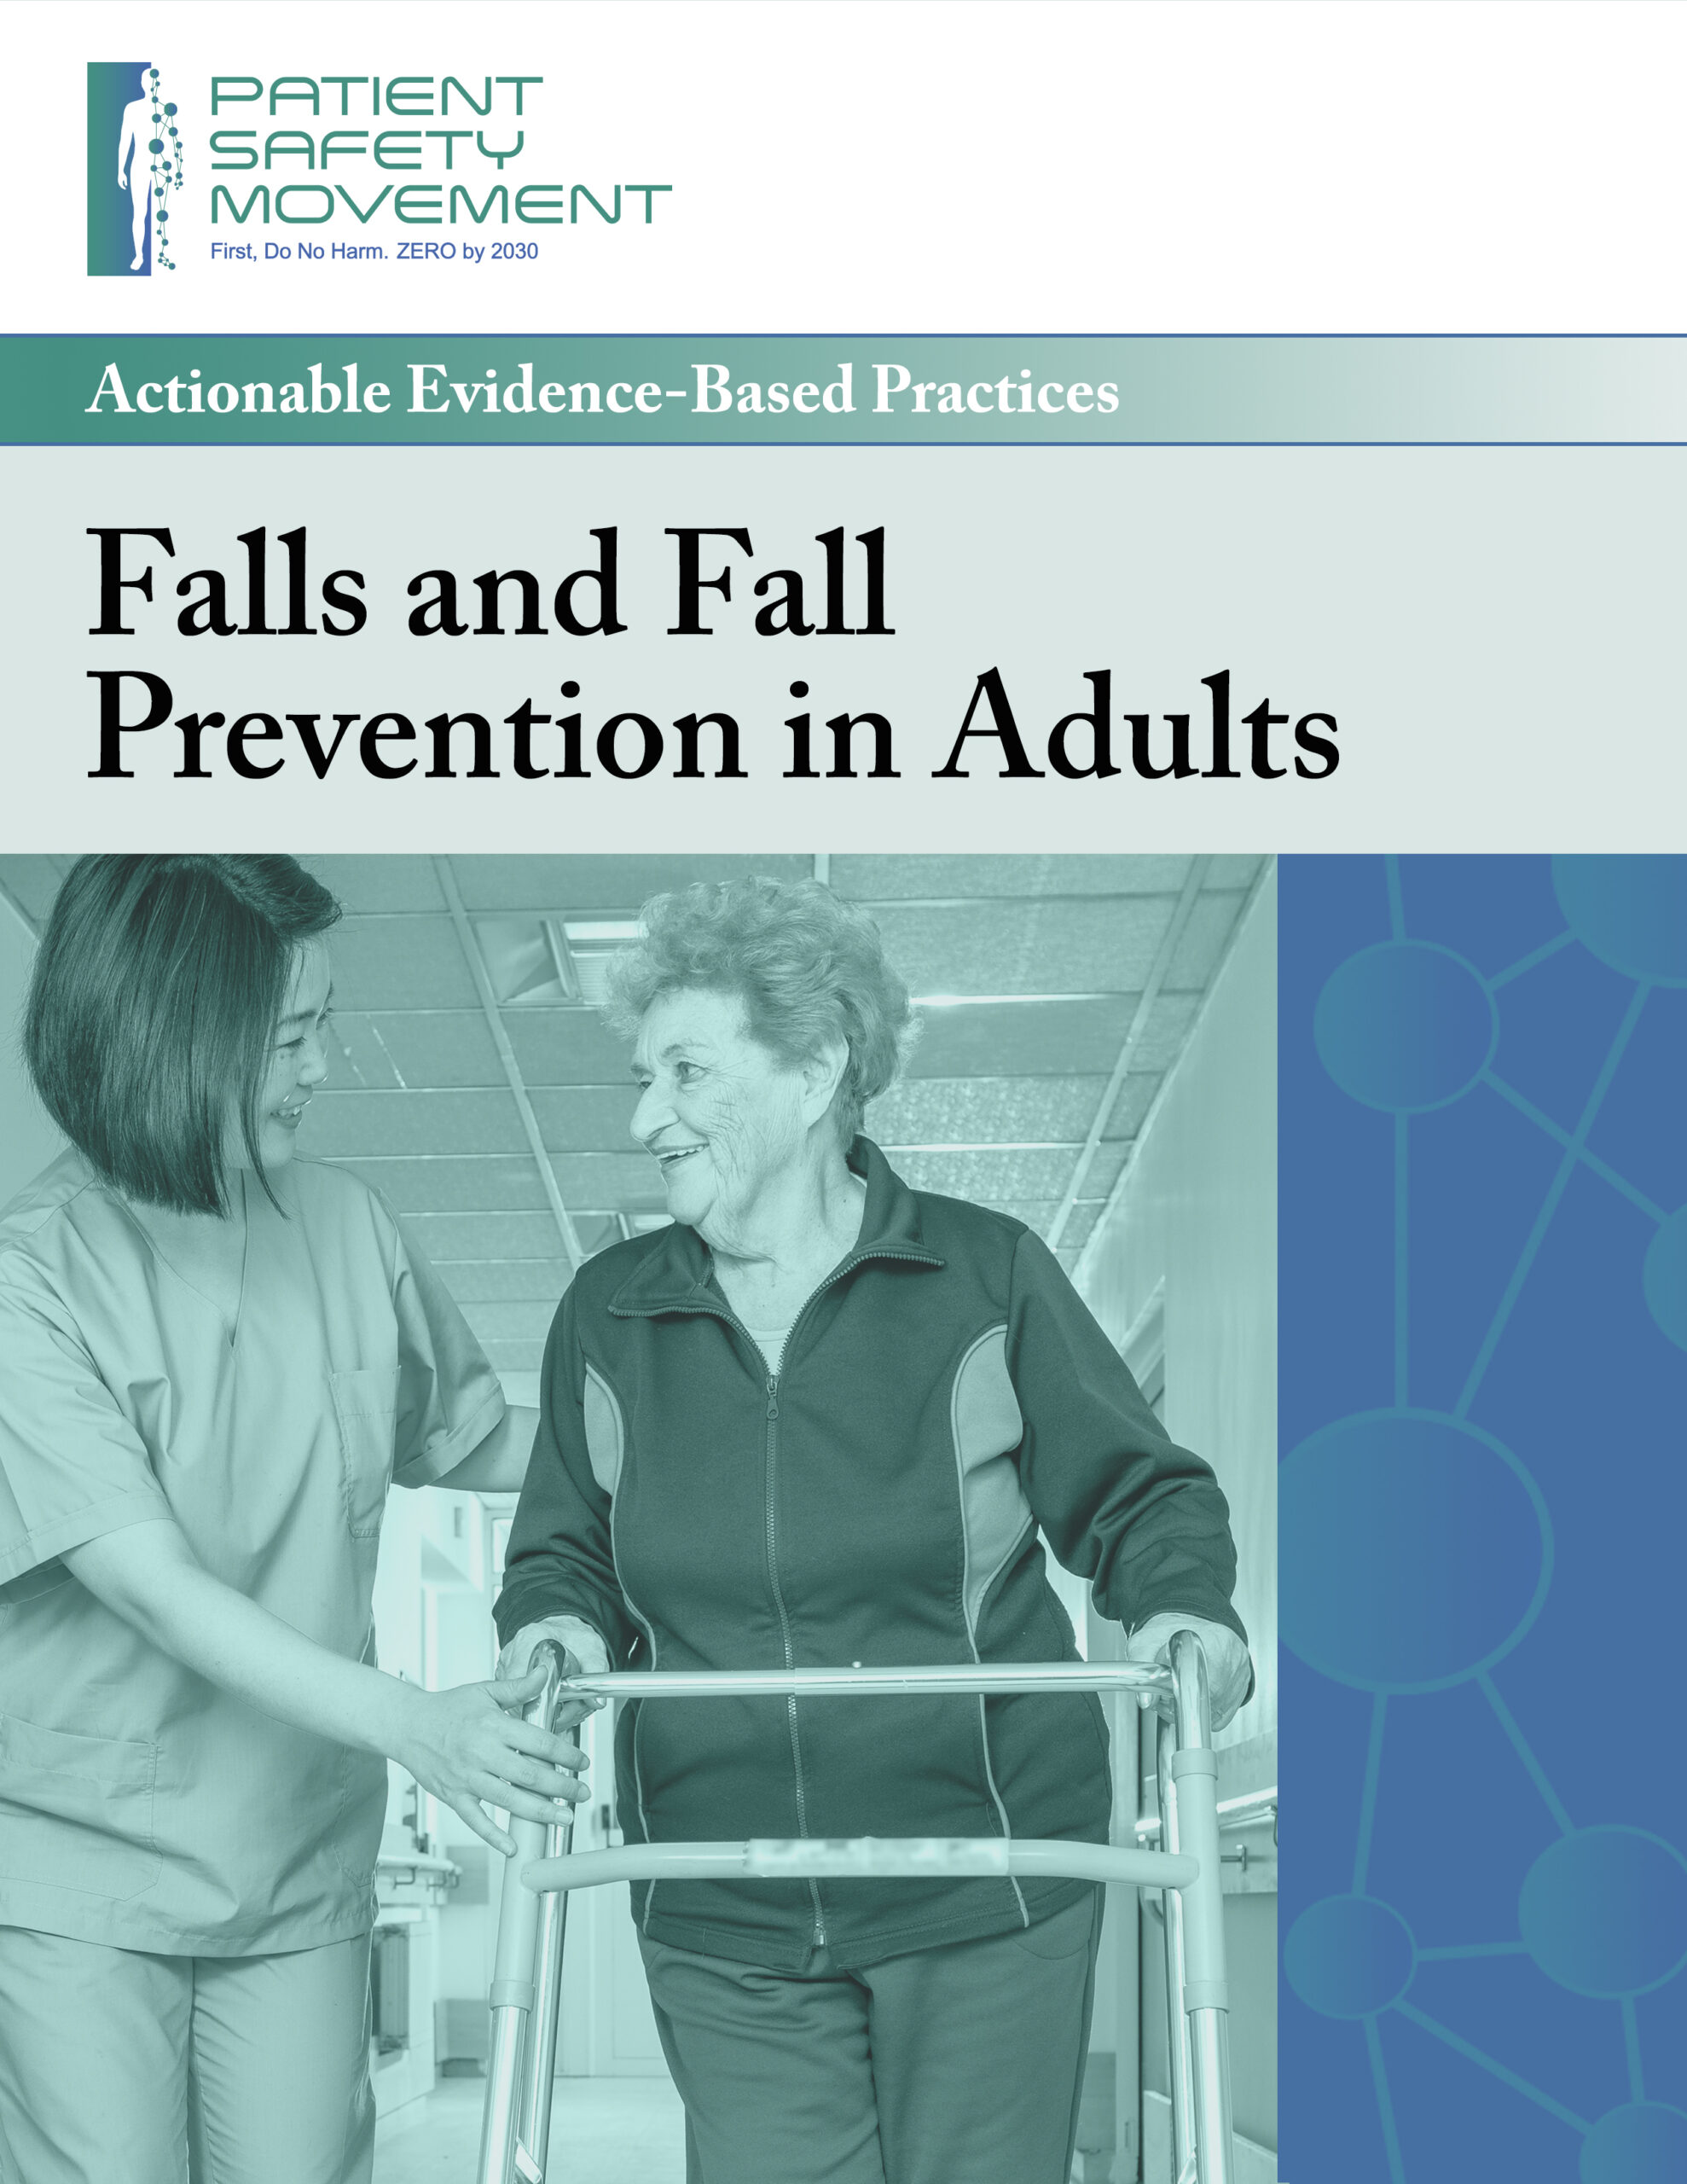 Falls and Fall Prevention in Adults